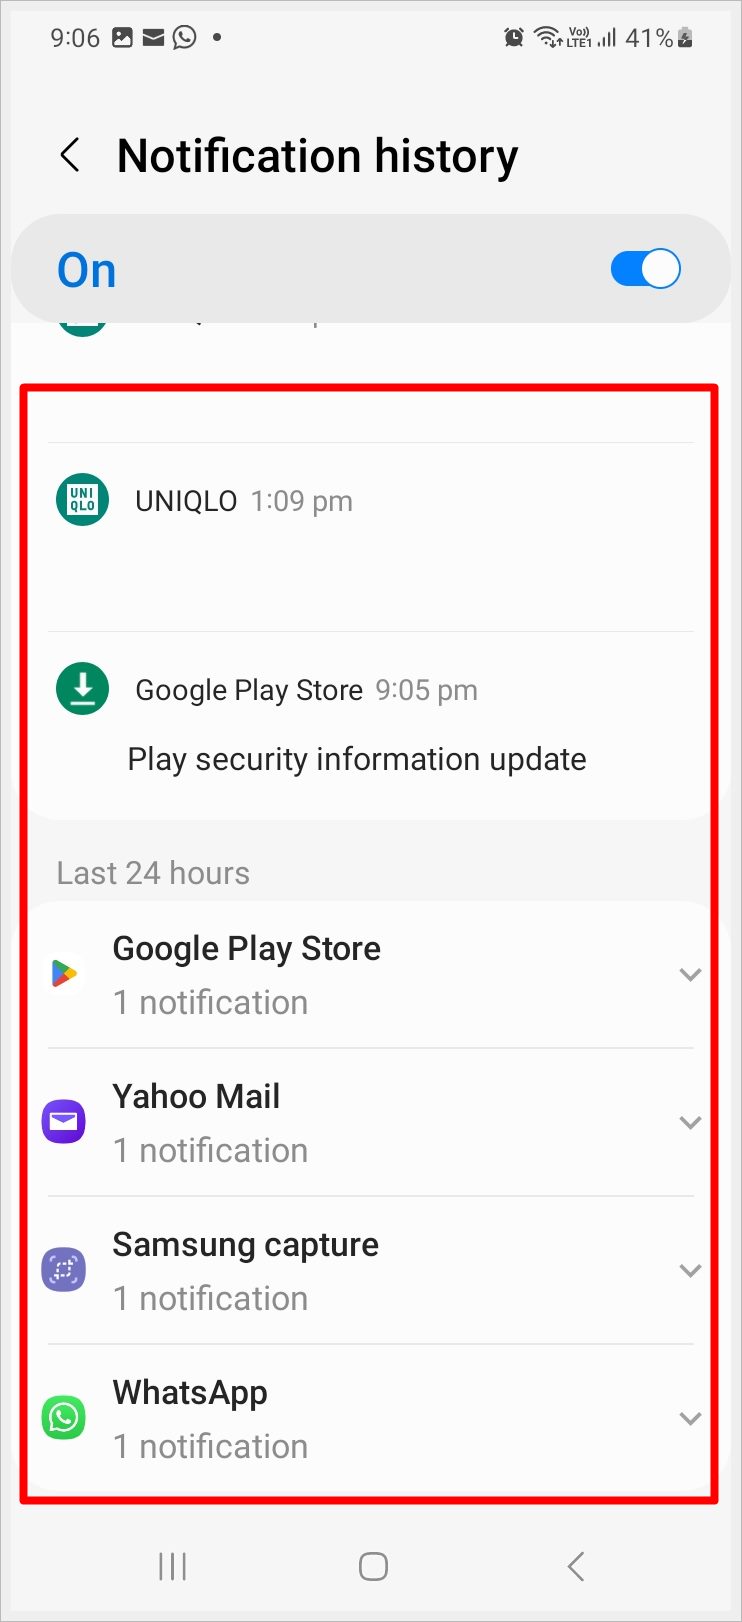 This image features a screenshot displaying all the notifications received from within the built-in notification history of an Android phone.